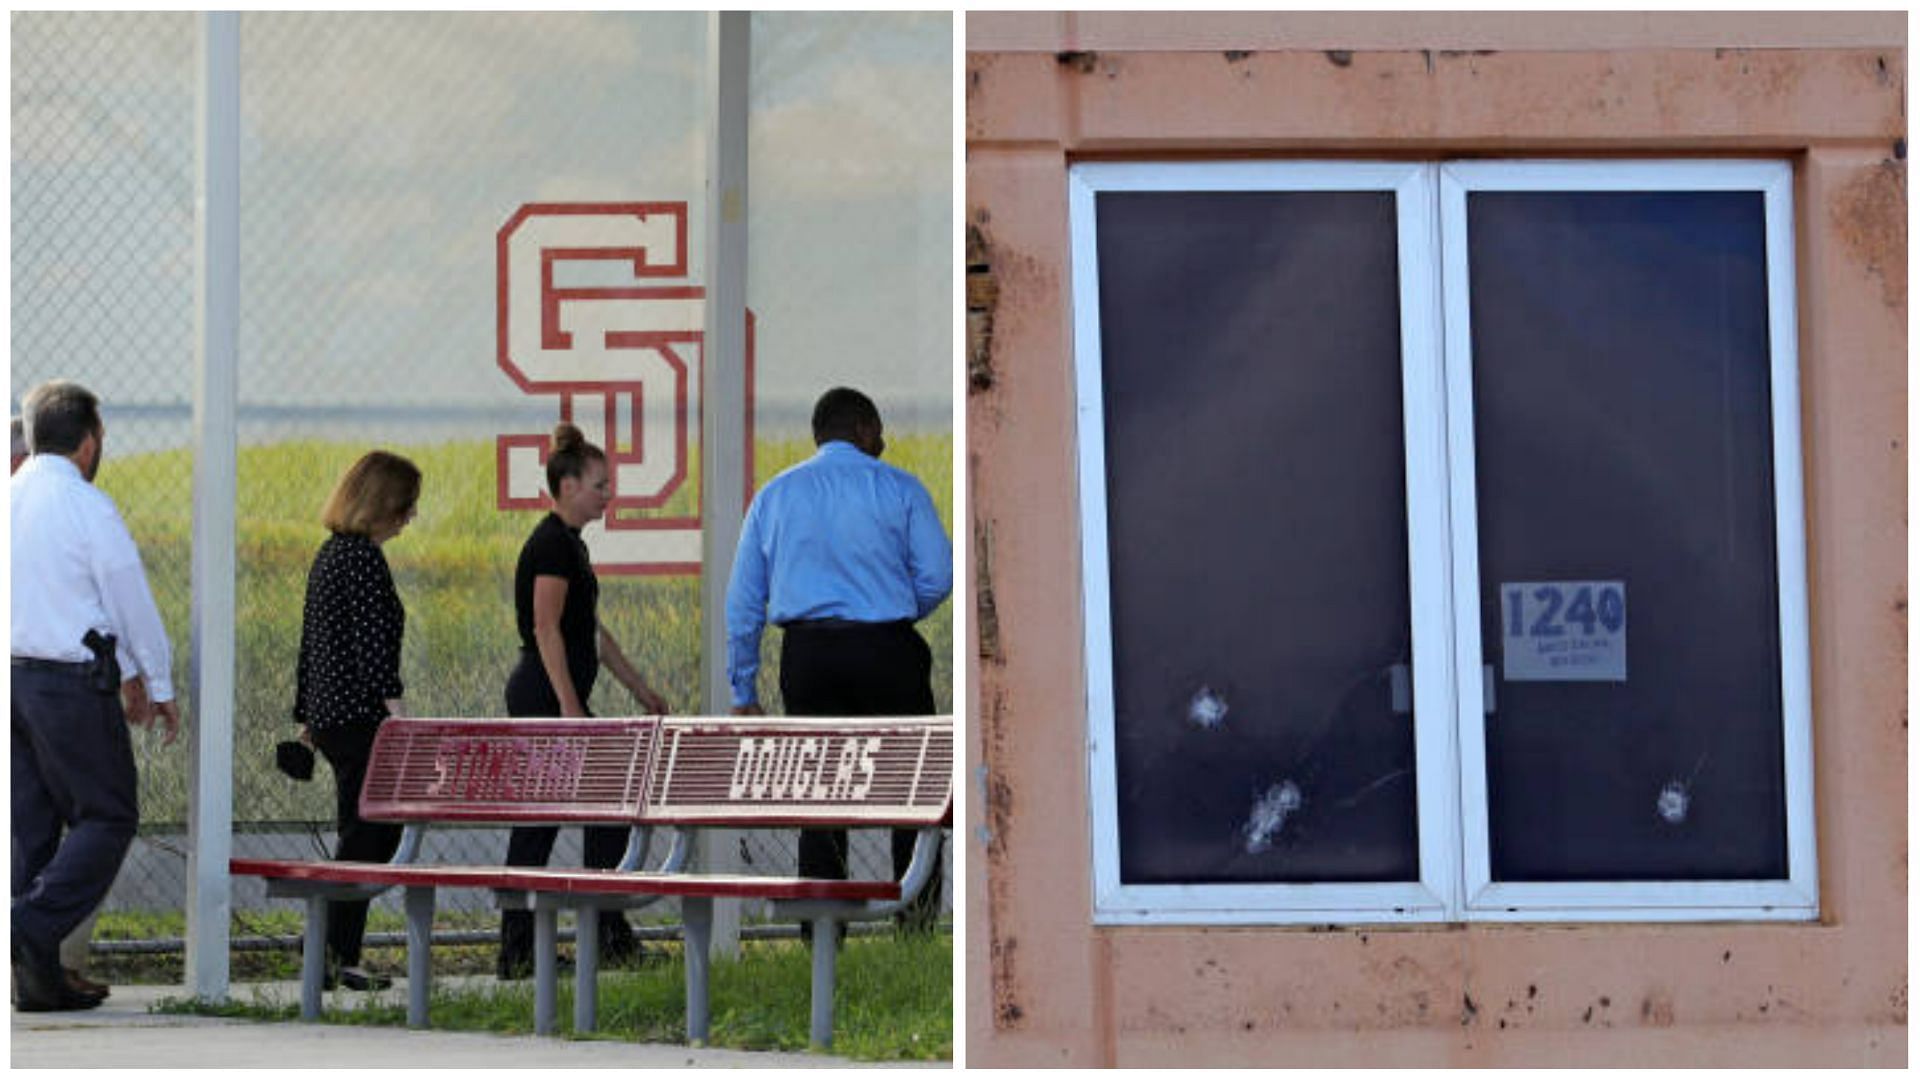 Jurors visit site of the shooting as part of the trial (Image via Getty Images)